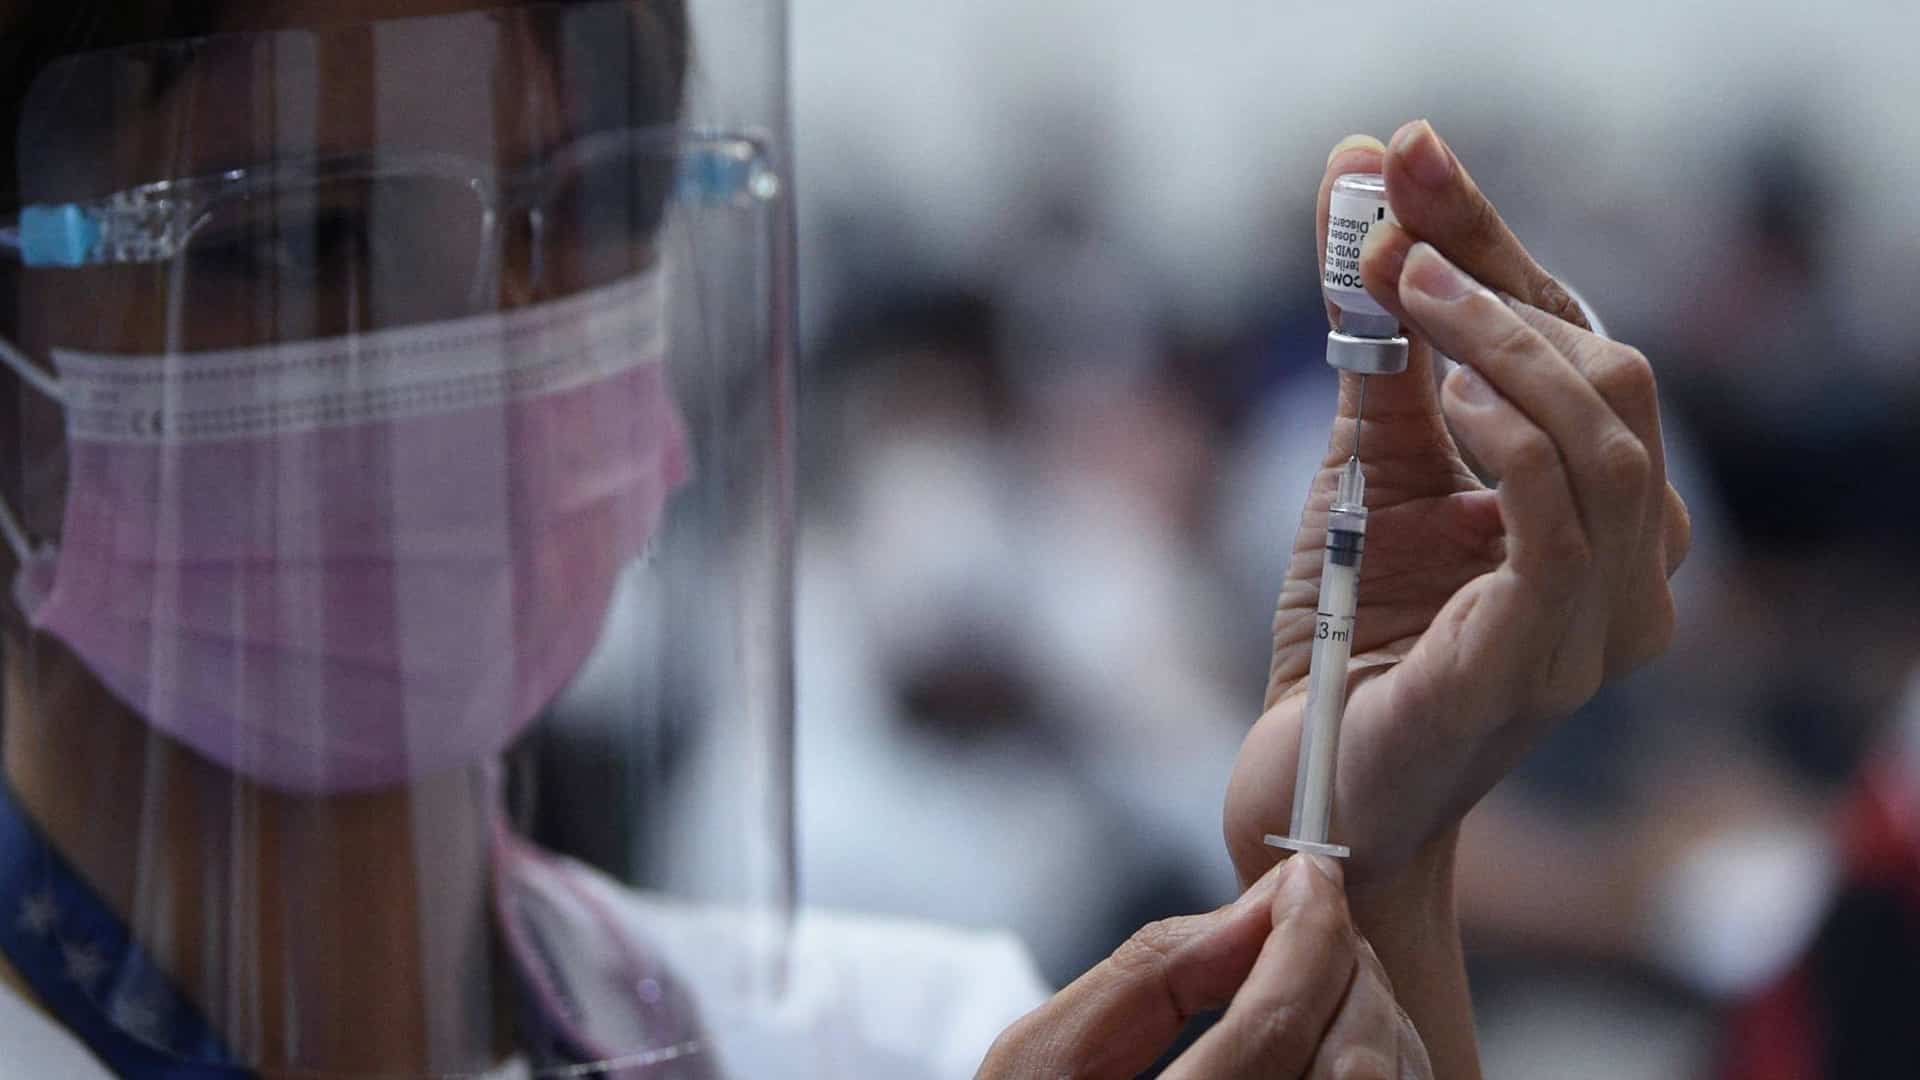 WHO official asks power players to end vaccine access gap